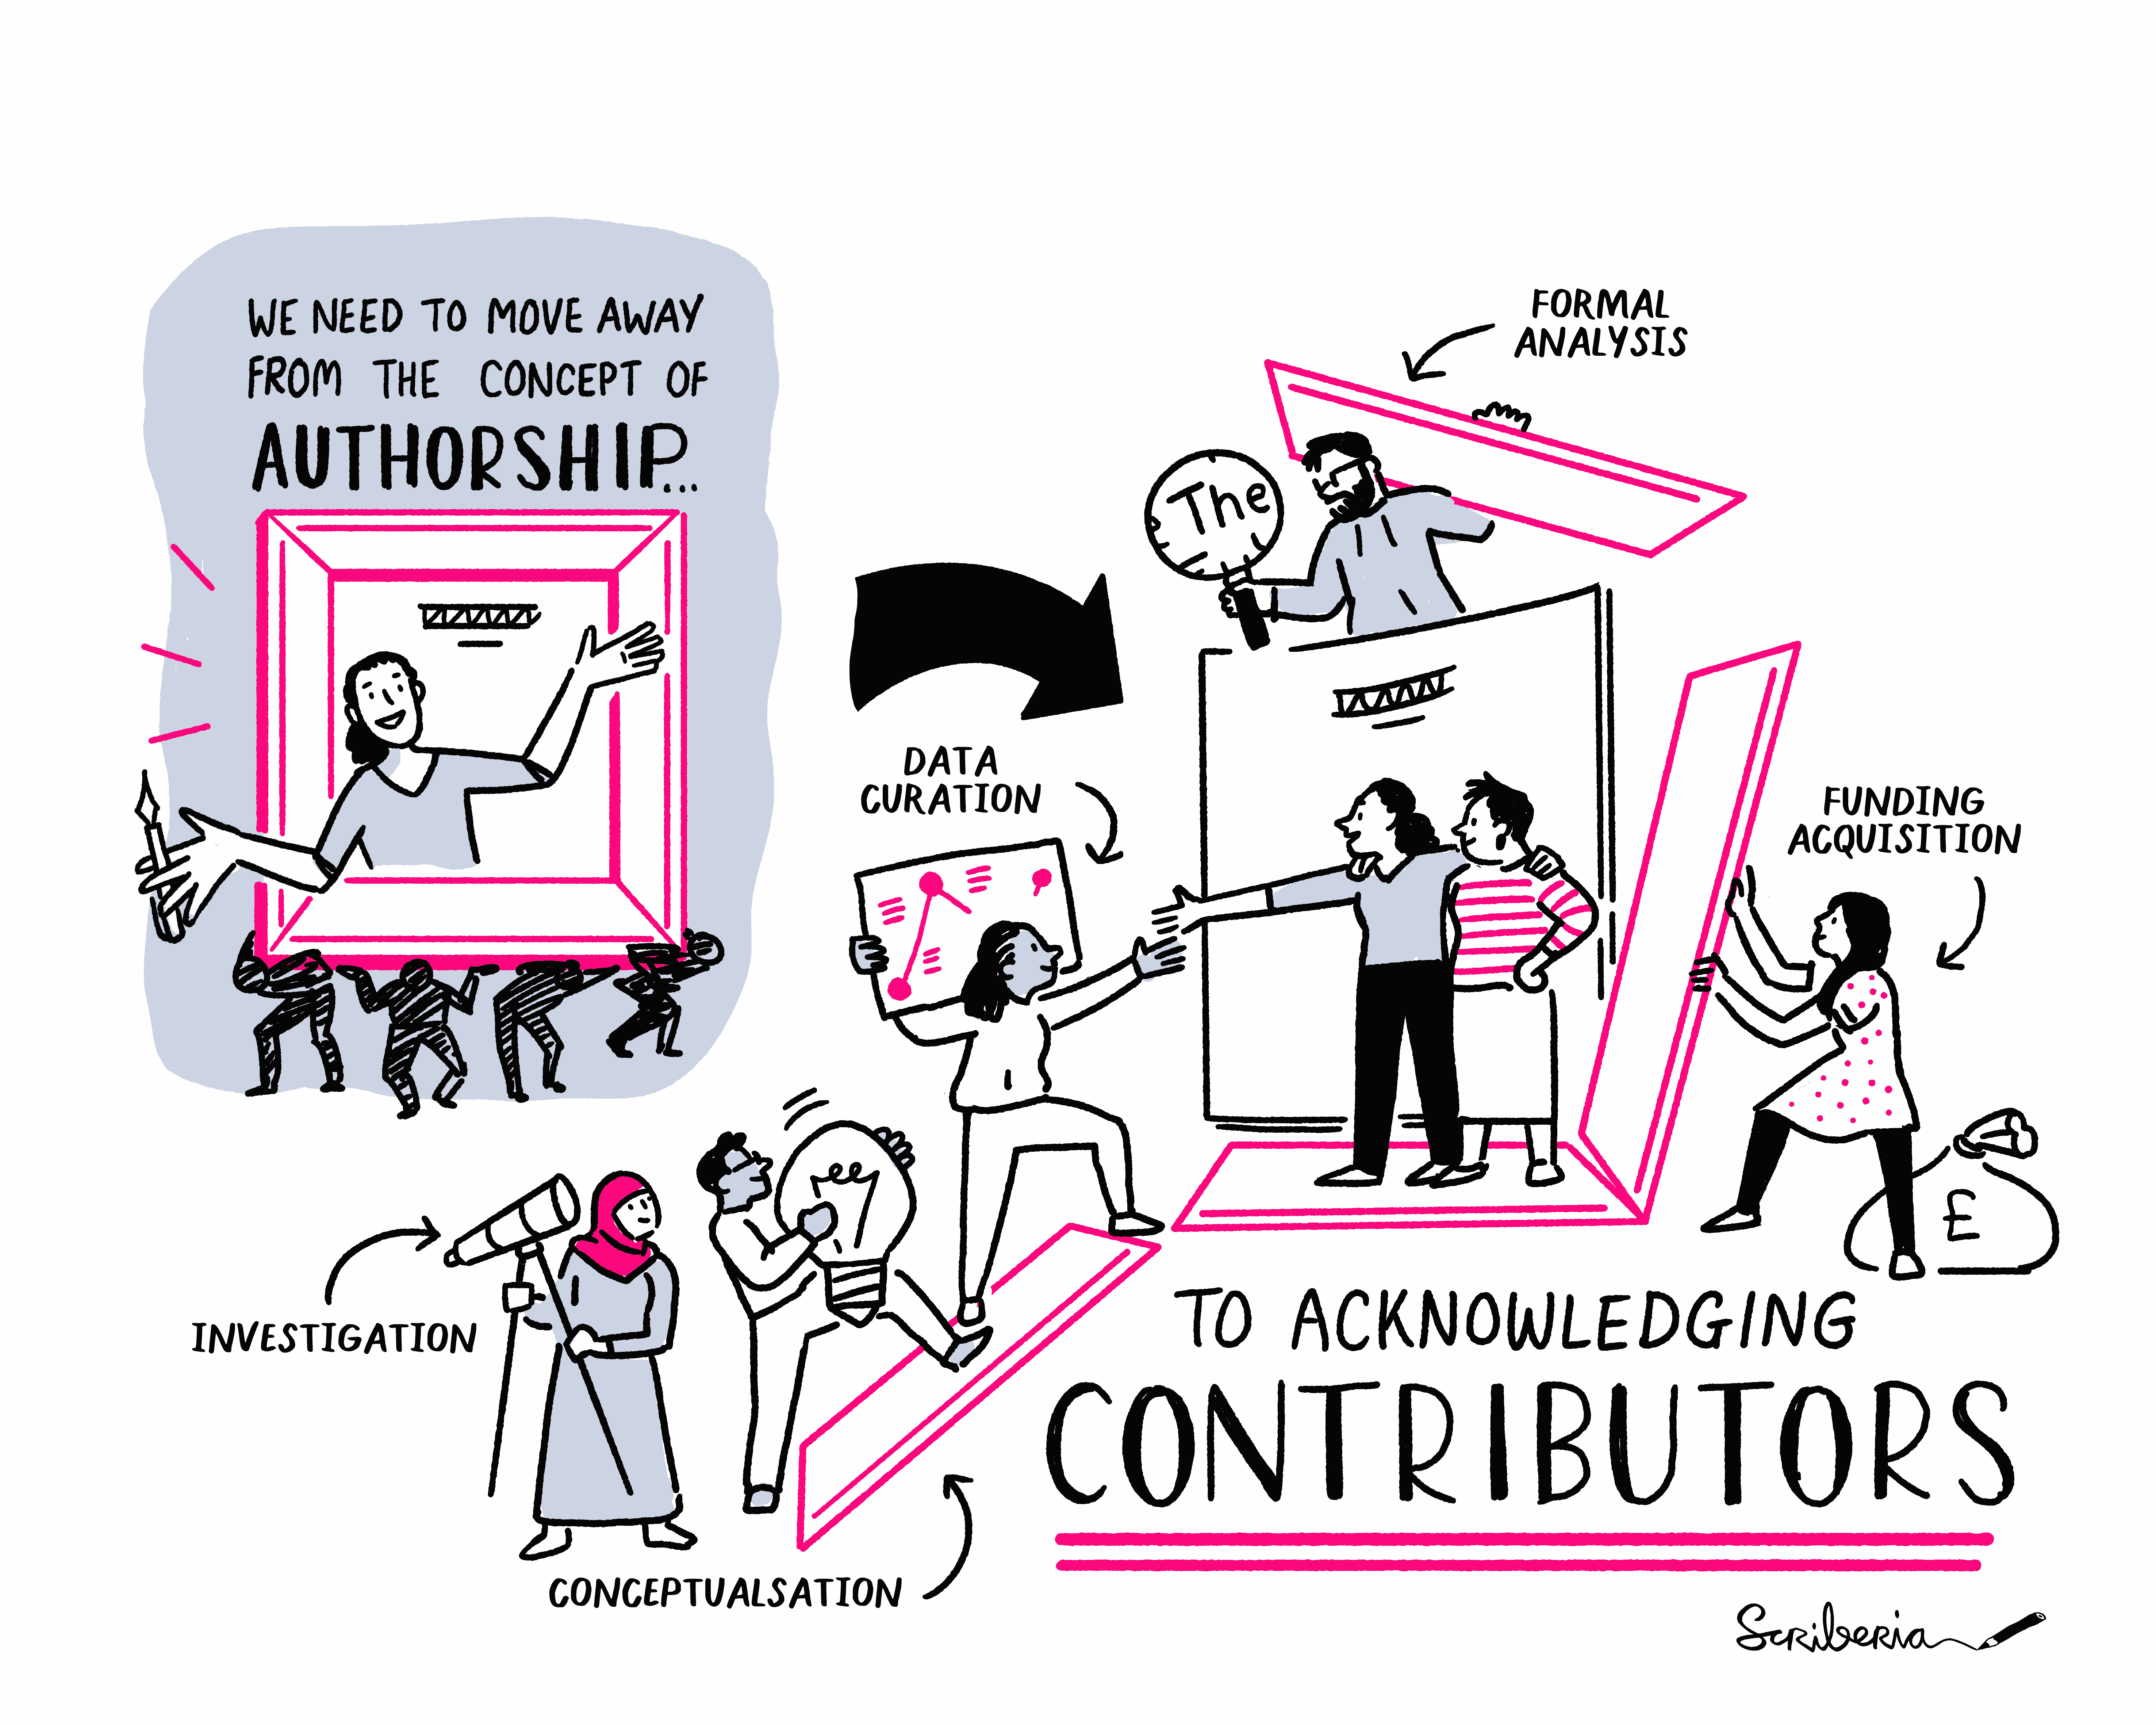 We need to move away from the concept of 'authorship' (depicted as one person supported by four unindentifiable figures) to acknowledging contributors - represented by lots of visible figures representing investigation, conceptualisation, data curation, formal analysis, and funding acquisition.